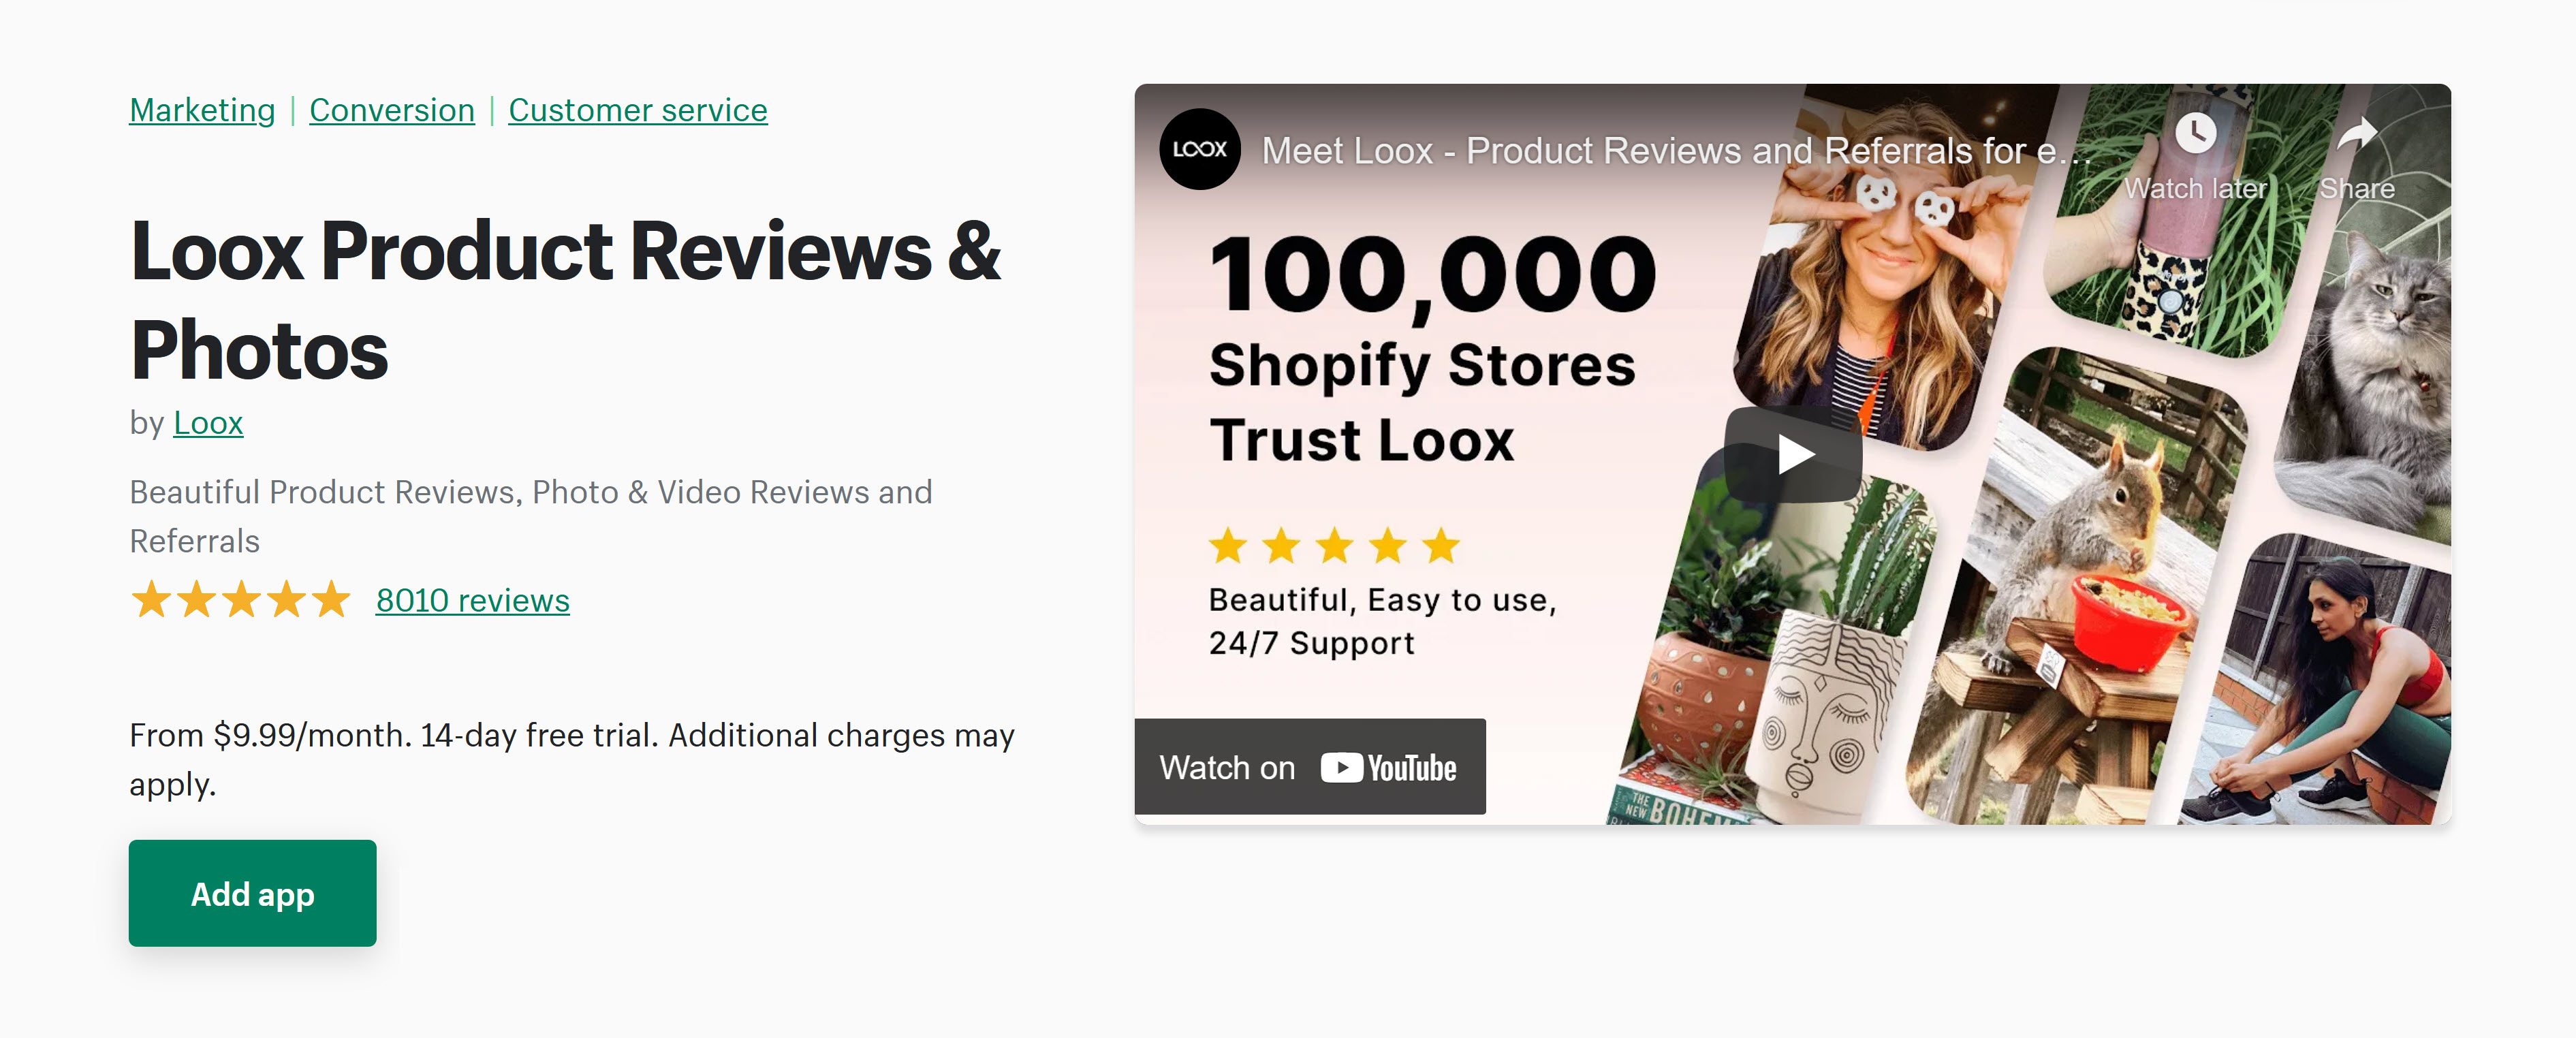 Loox Product Reviews & Photos shopify app store listing